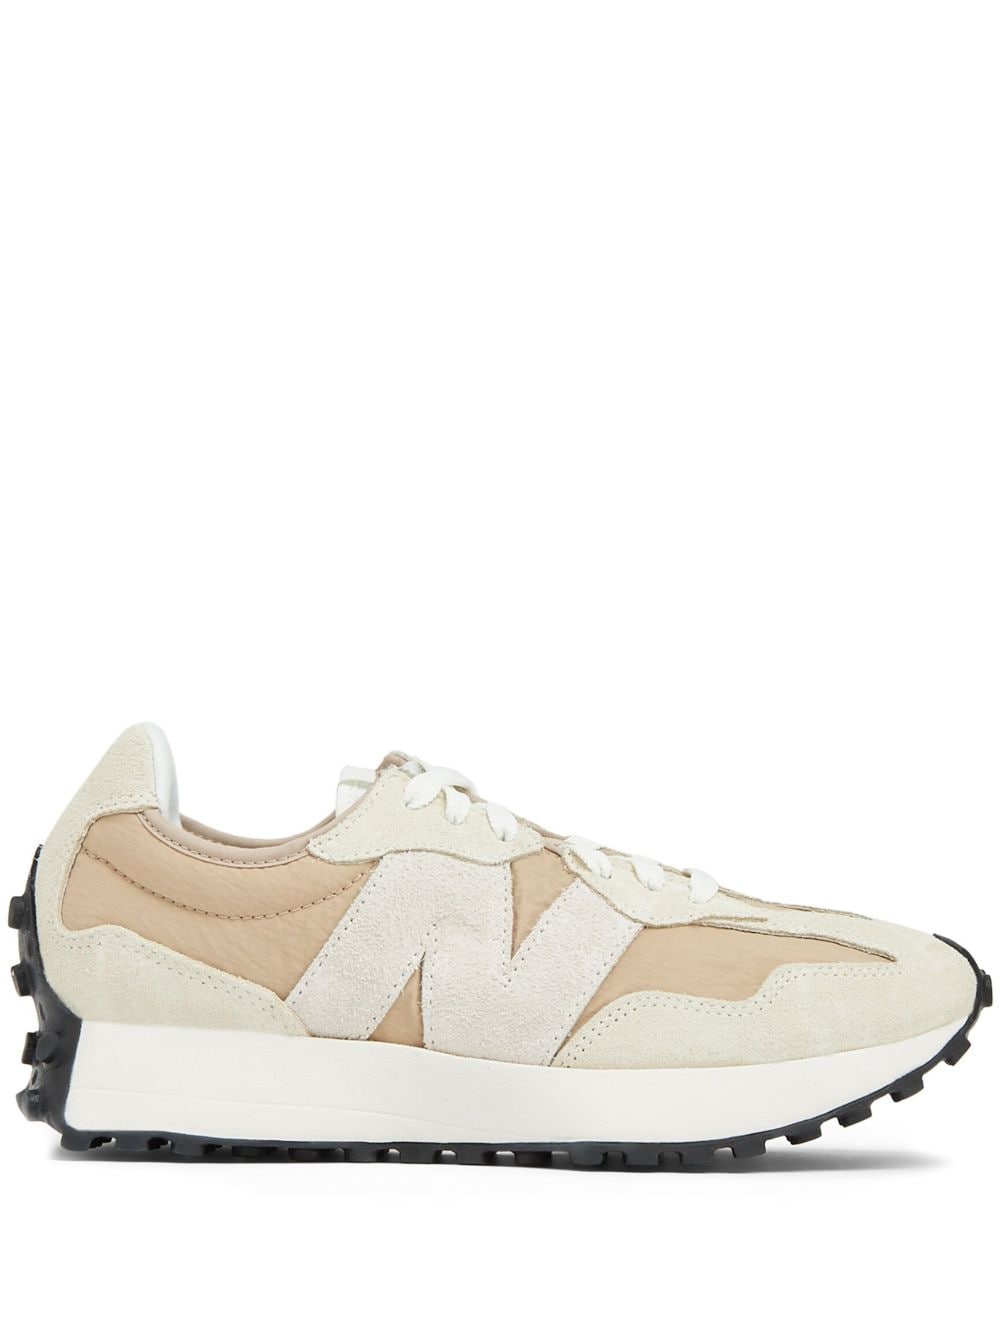 New Balance 327 Sneakers In Nude